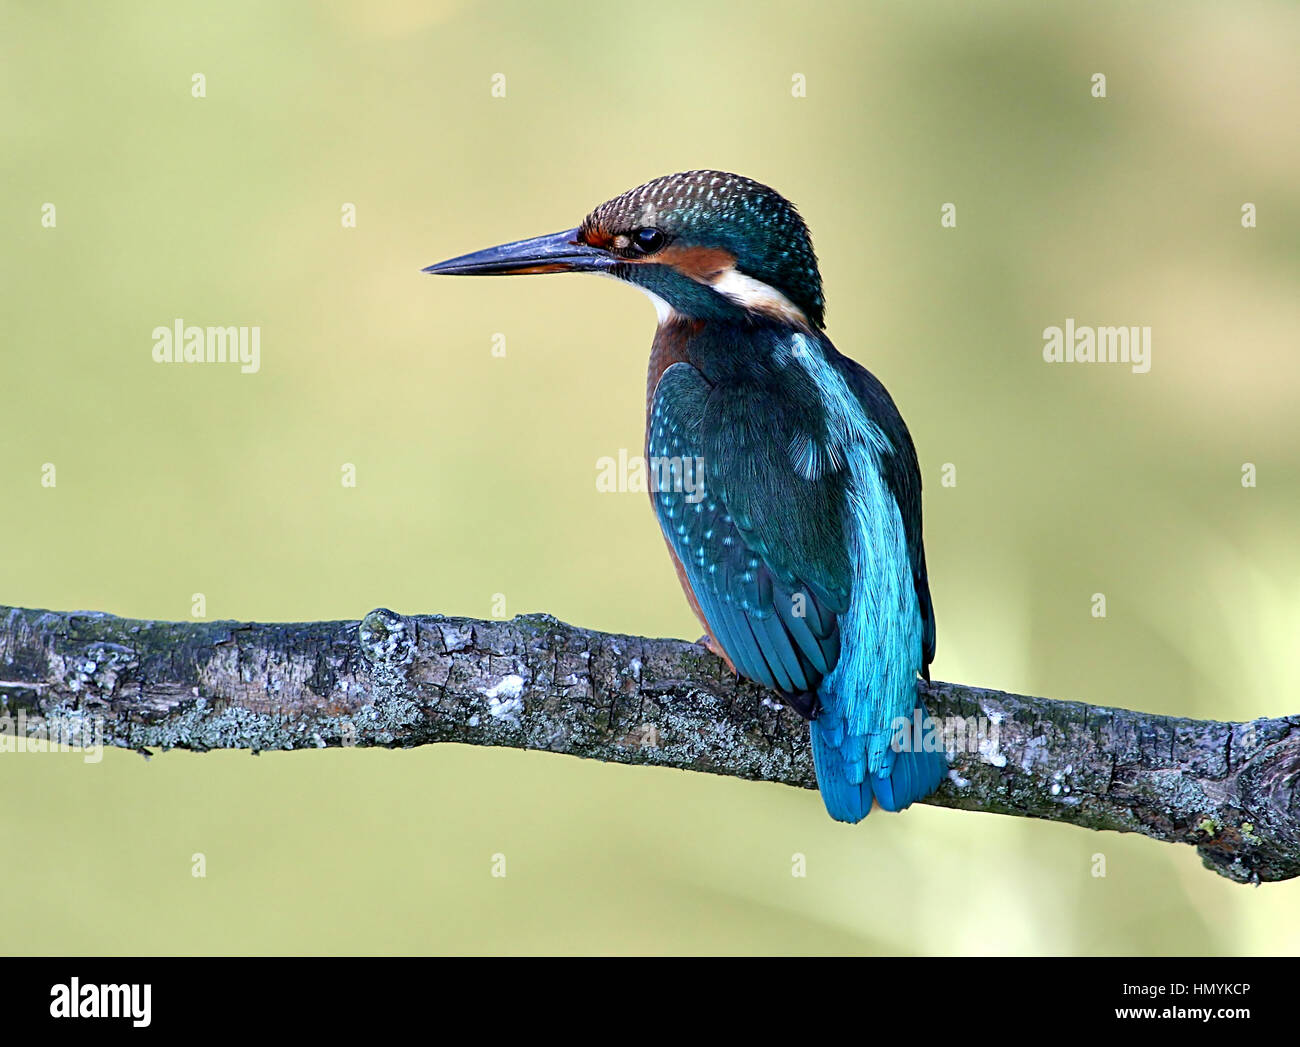 European Kingfisher (Alcedo Atthis) posing on a branch, seen in profile Stock Photo